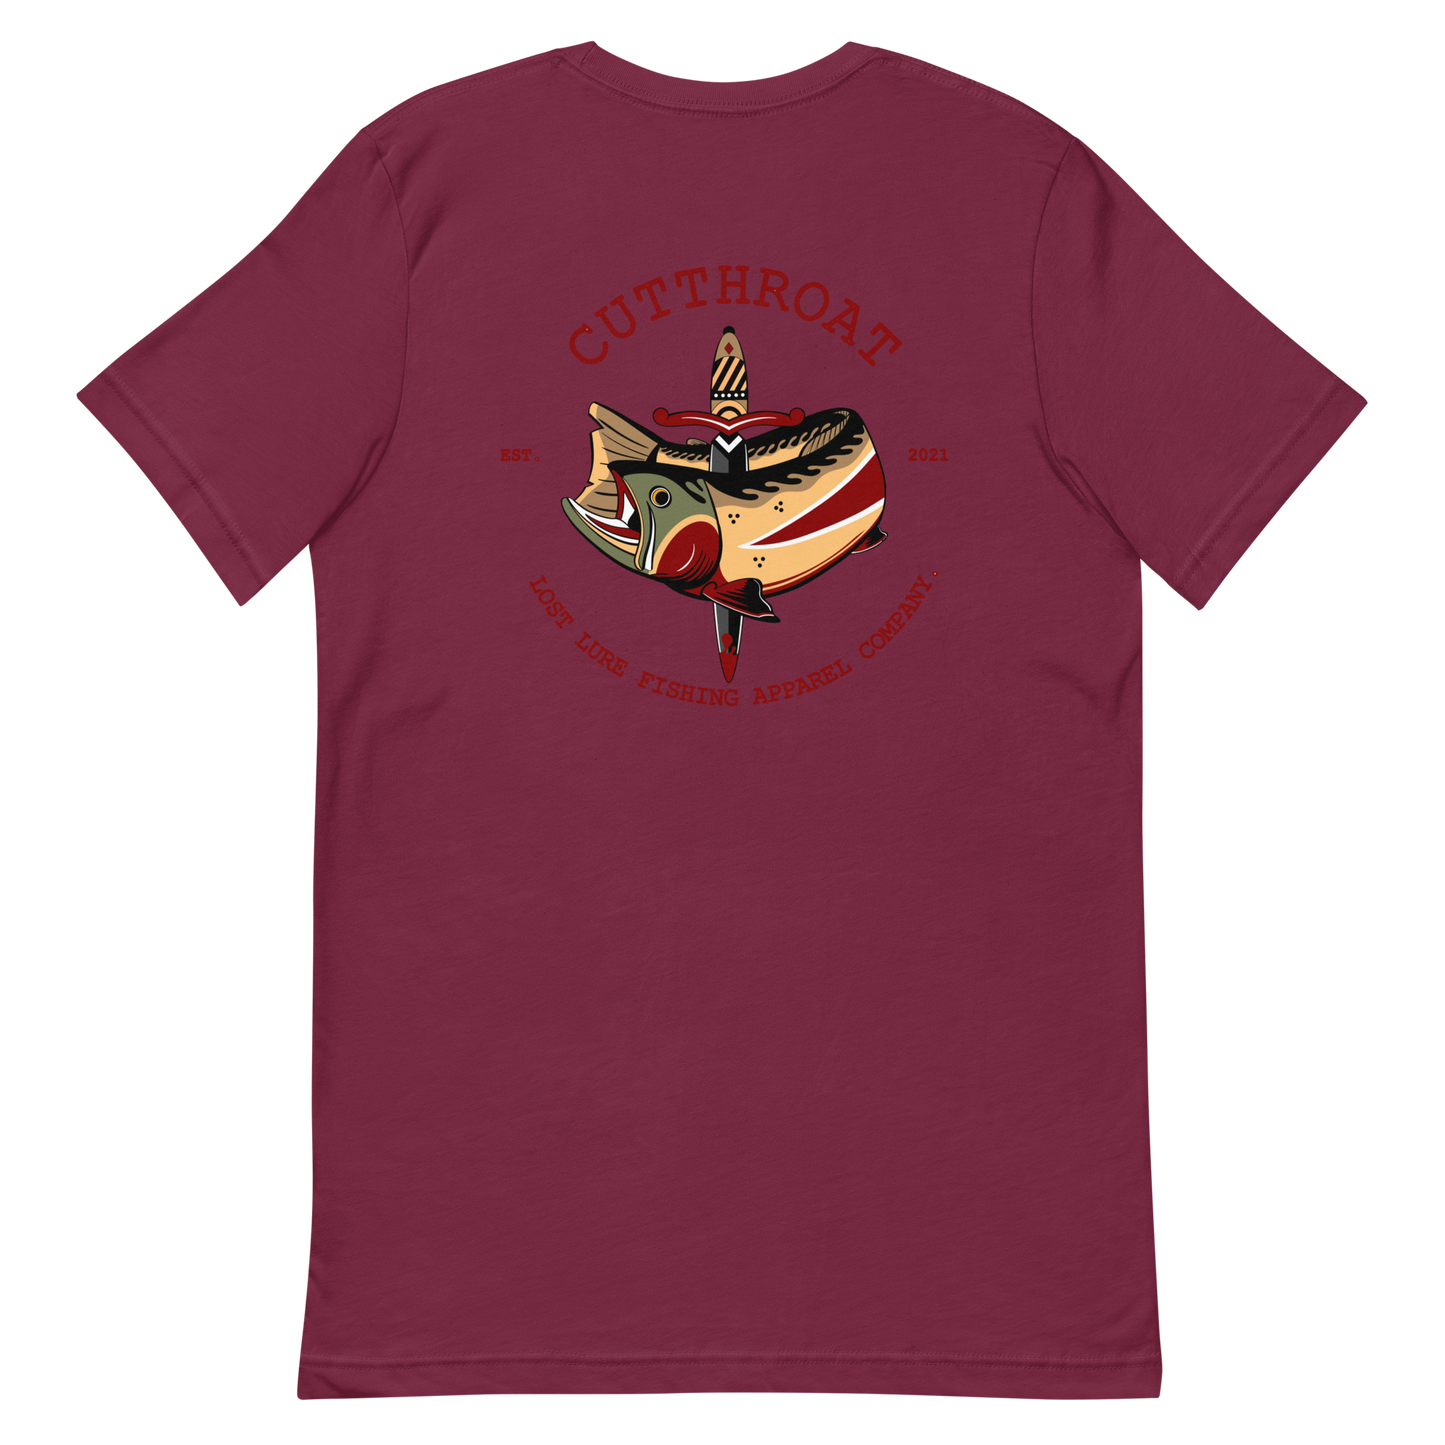 Cutthroat Trout fishing shirt. It’s an American traditional style design with a cutthroat trout and a dagger. The shirt reads Cutthroat trout, est. 2021, lost lure fishing apparel company. The front of the shirt has the lost lure logo. Maroon fishing shirt, back